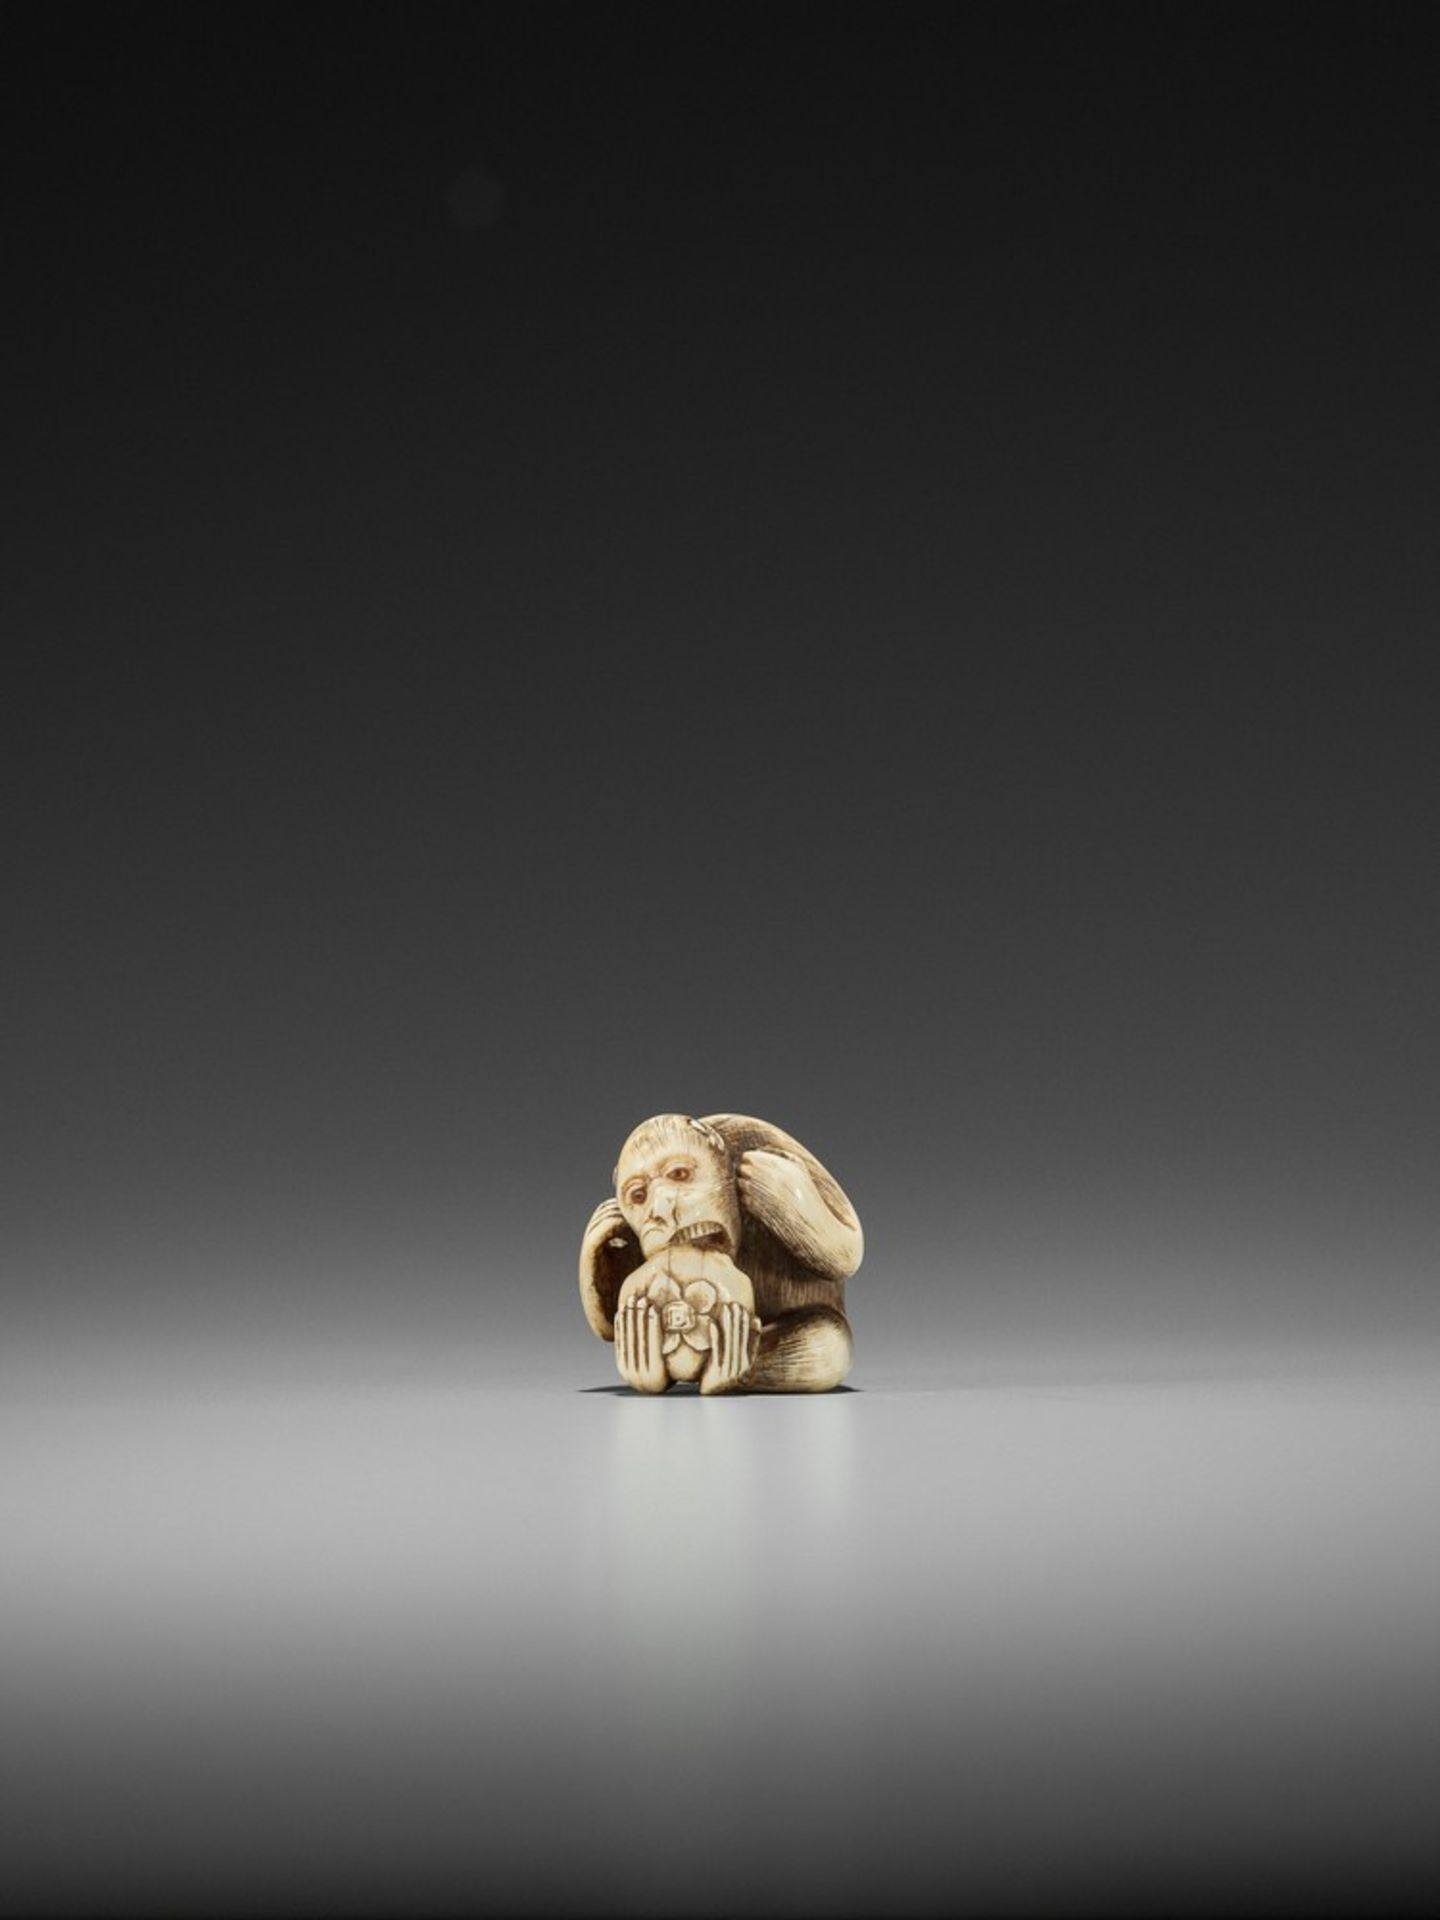 RANMEI: AN IVORY NETSUKE OF A MONKEY WITH PERSIMMON By Ranmei, signed Ranmei 蘭明Japan, Kyoto, 19th